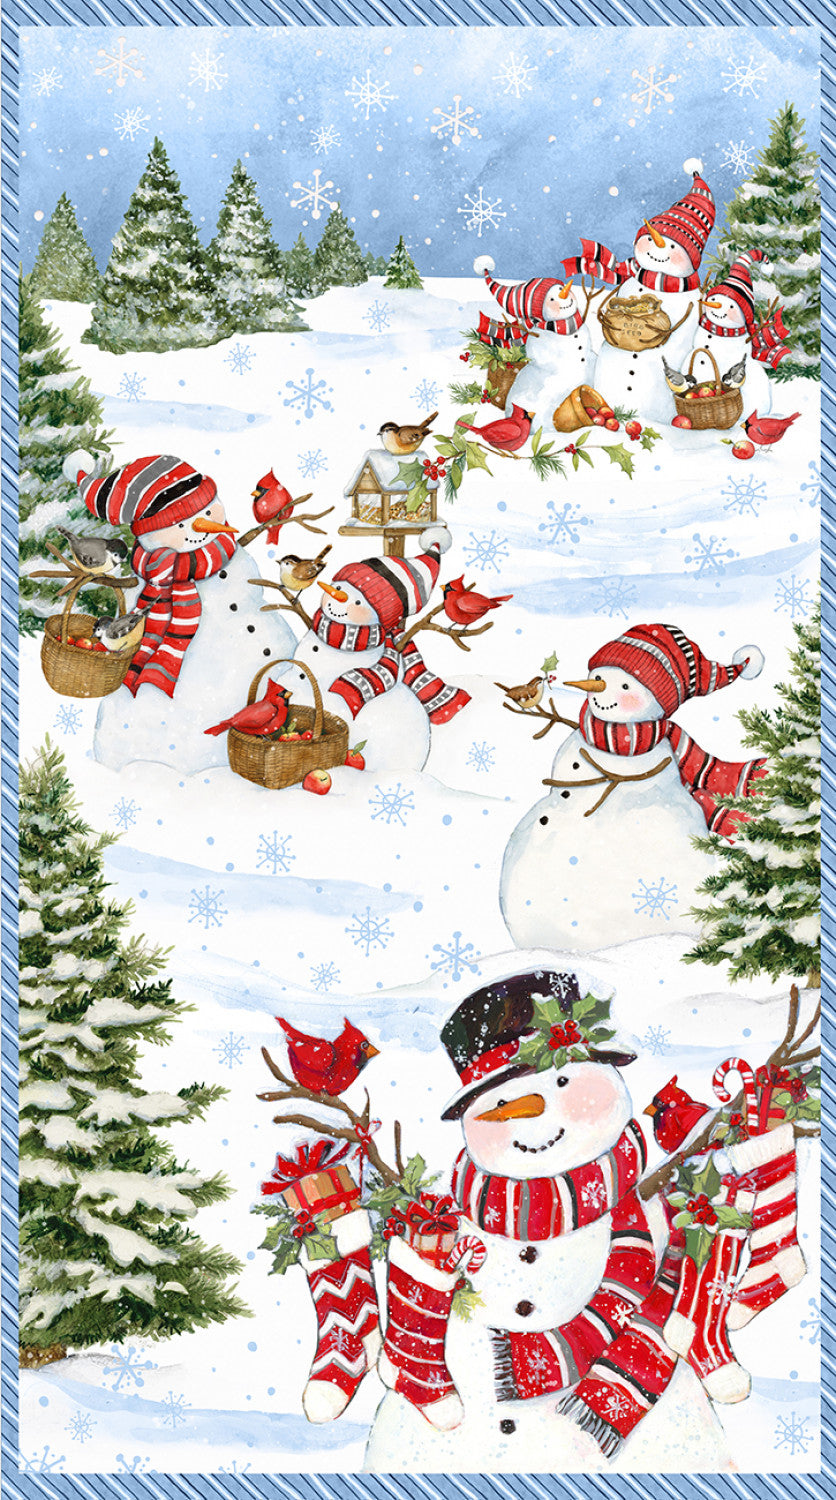 Frosty Frolic | Snowman 24" Panel by Susan Winget for Wilmington